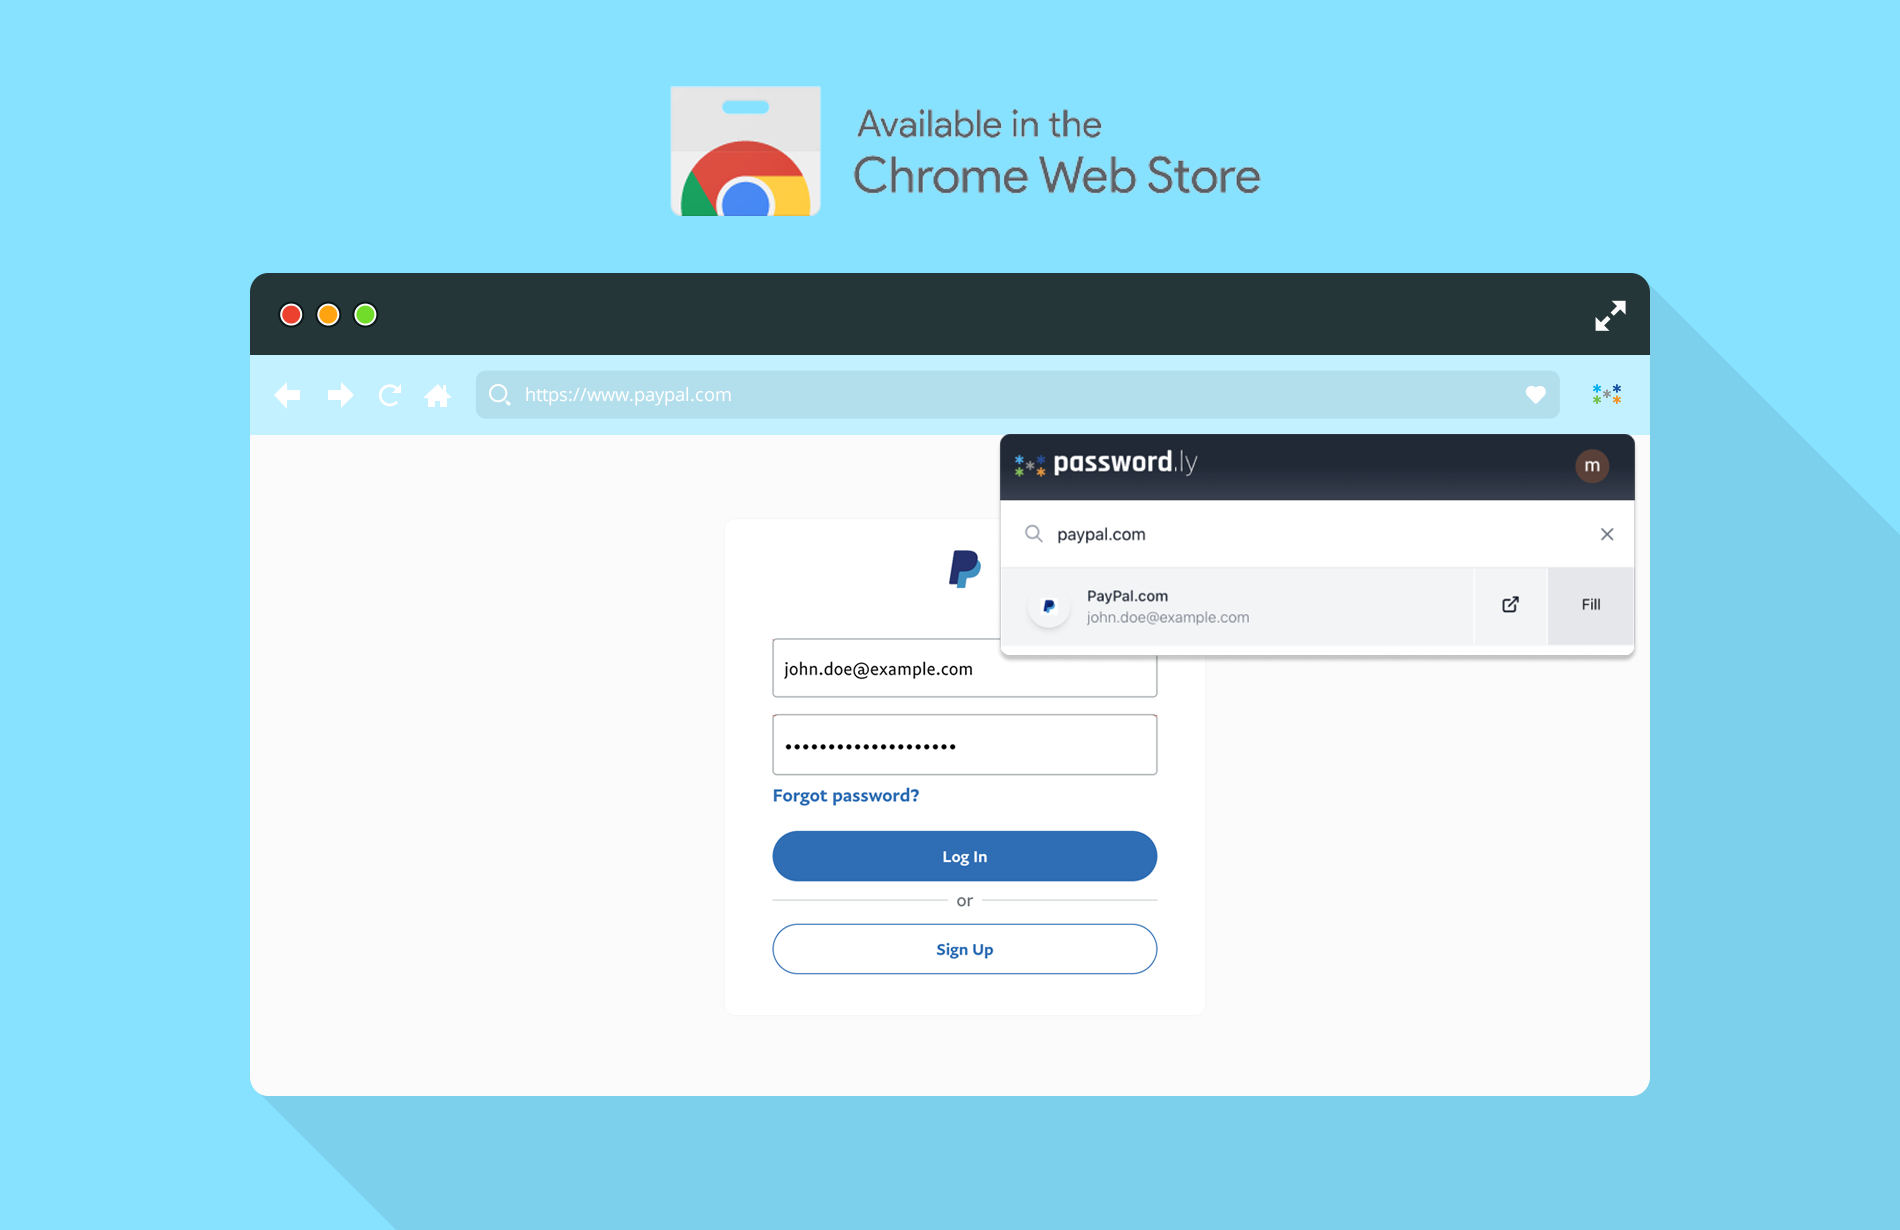 Password.ly Chrome extension is now available